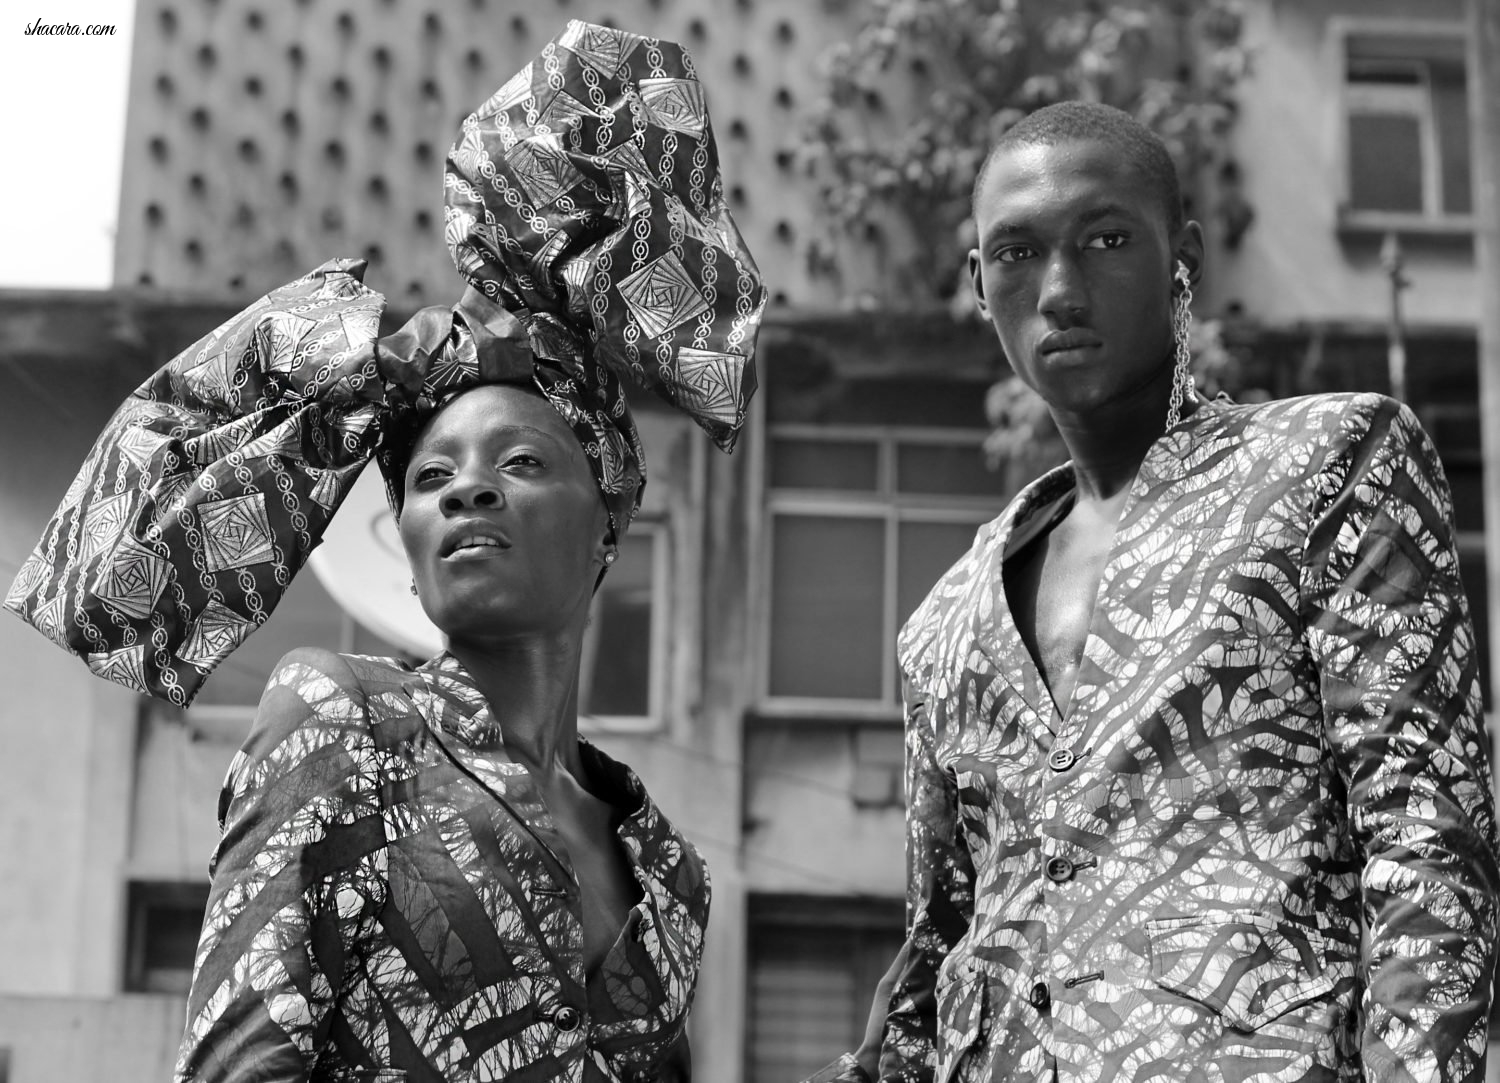 Reme Liman Celebrates Africa’s Creative Innovative Culture In New “Individuality” Collection